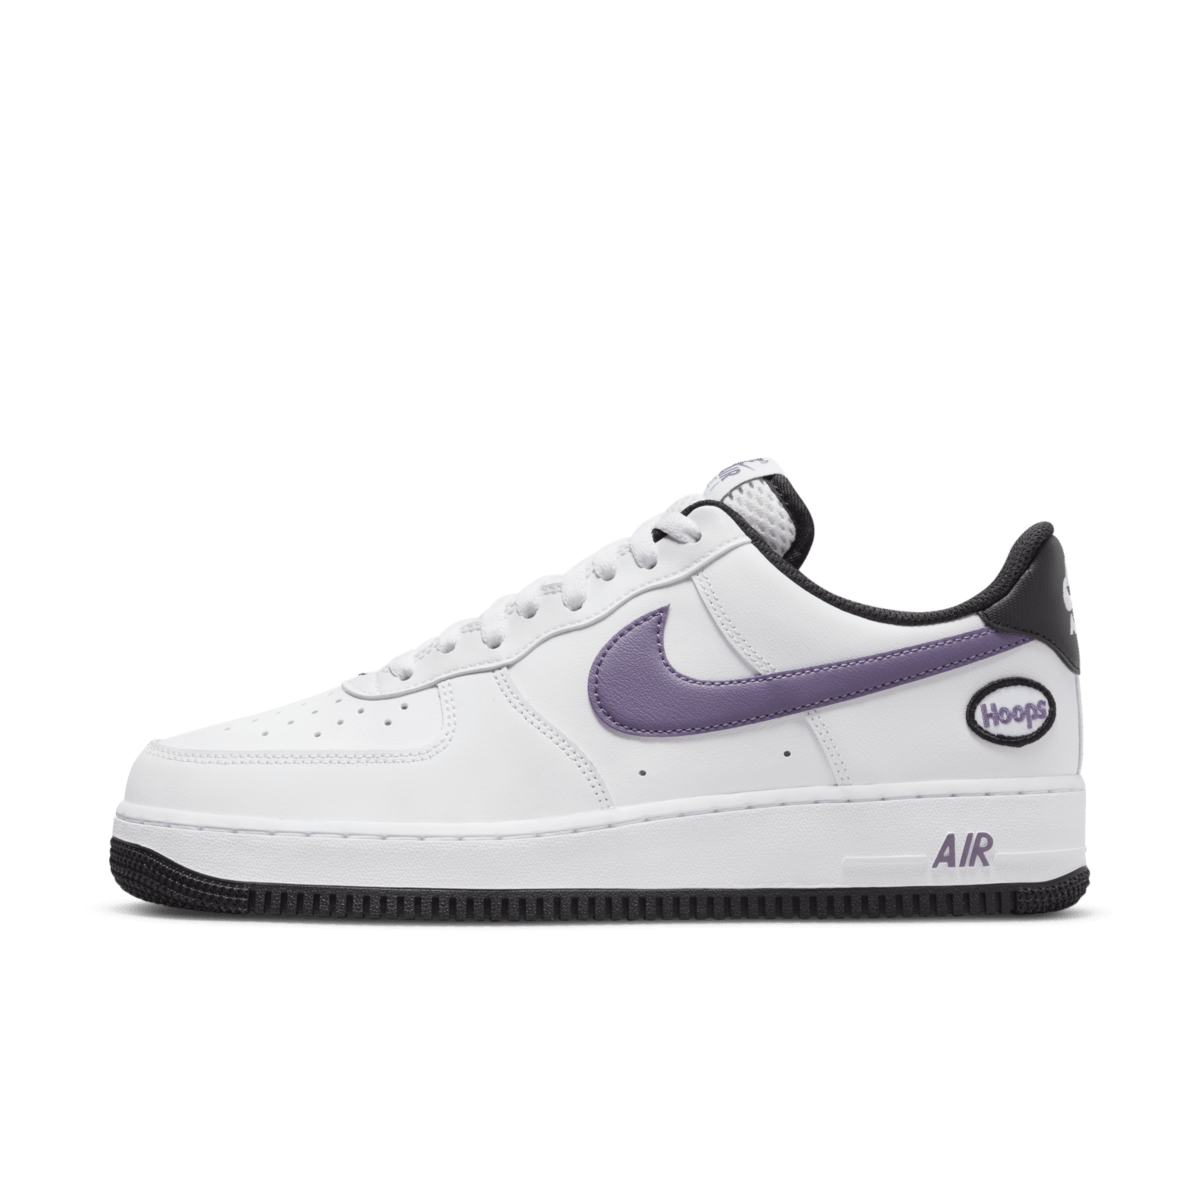 Nike Air Force 1 Low 'Canyon Purple' - Hoops DH7440-100